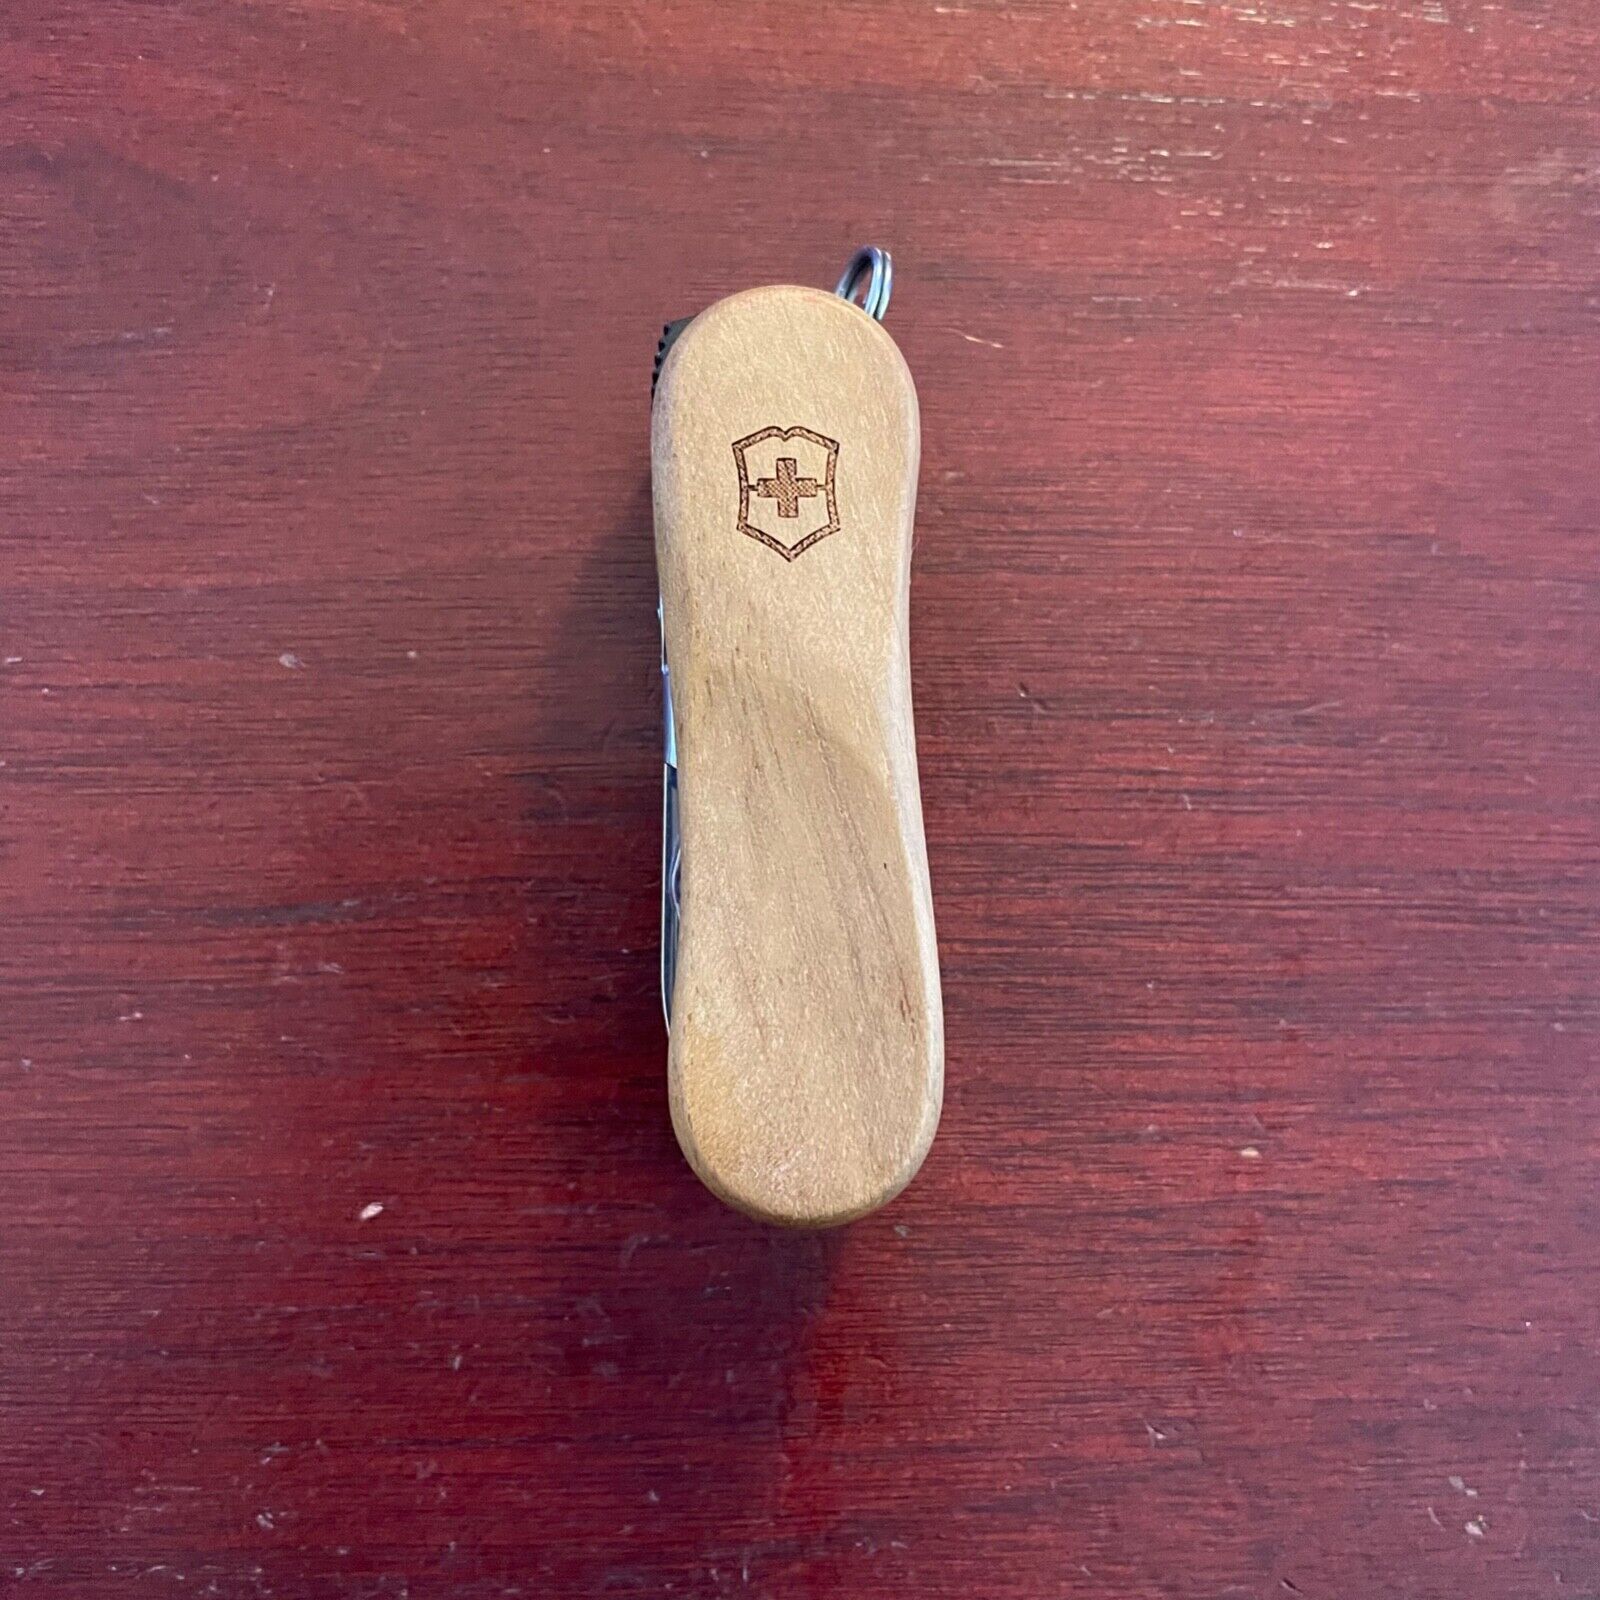 Victorinox Delémont NAIL CLIP 580 65mm Swiss Army Knife Walnut Wood Scales Used